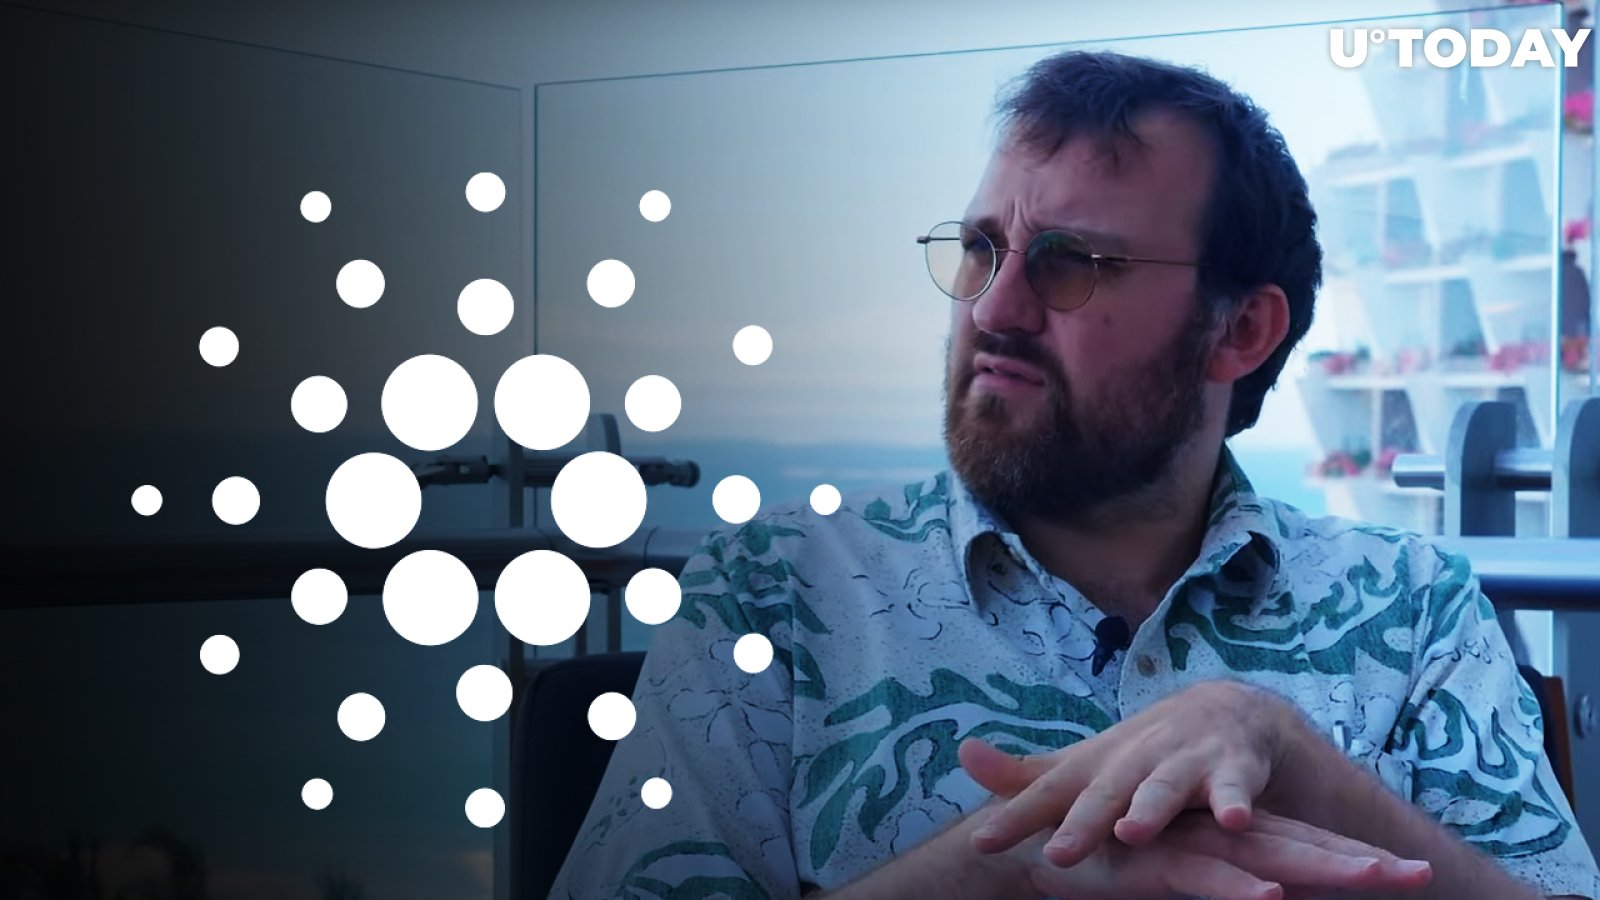 Cardano Creator Says Cardano Is Just Starting After Adding 100,000 New Addresses in Last Month